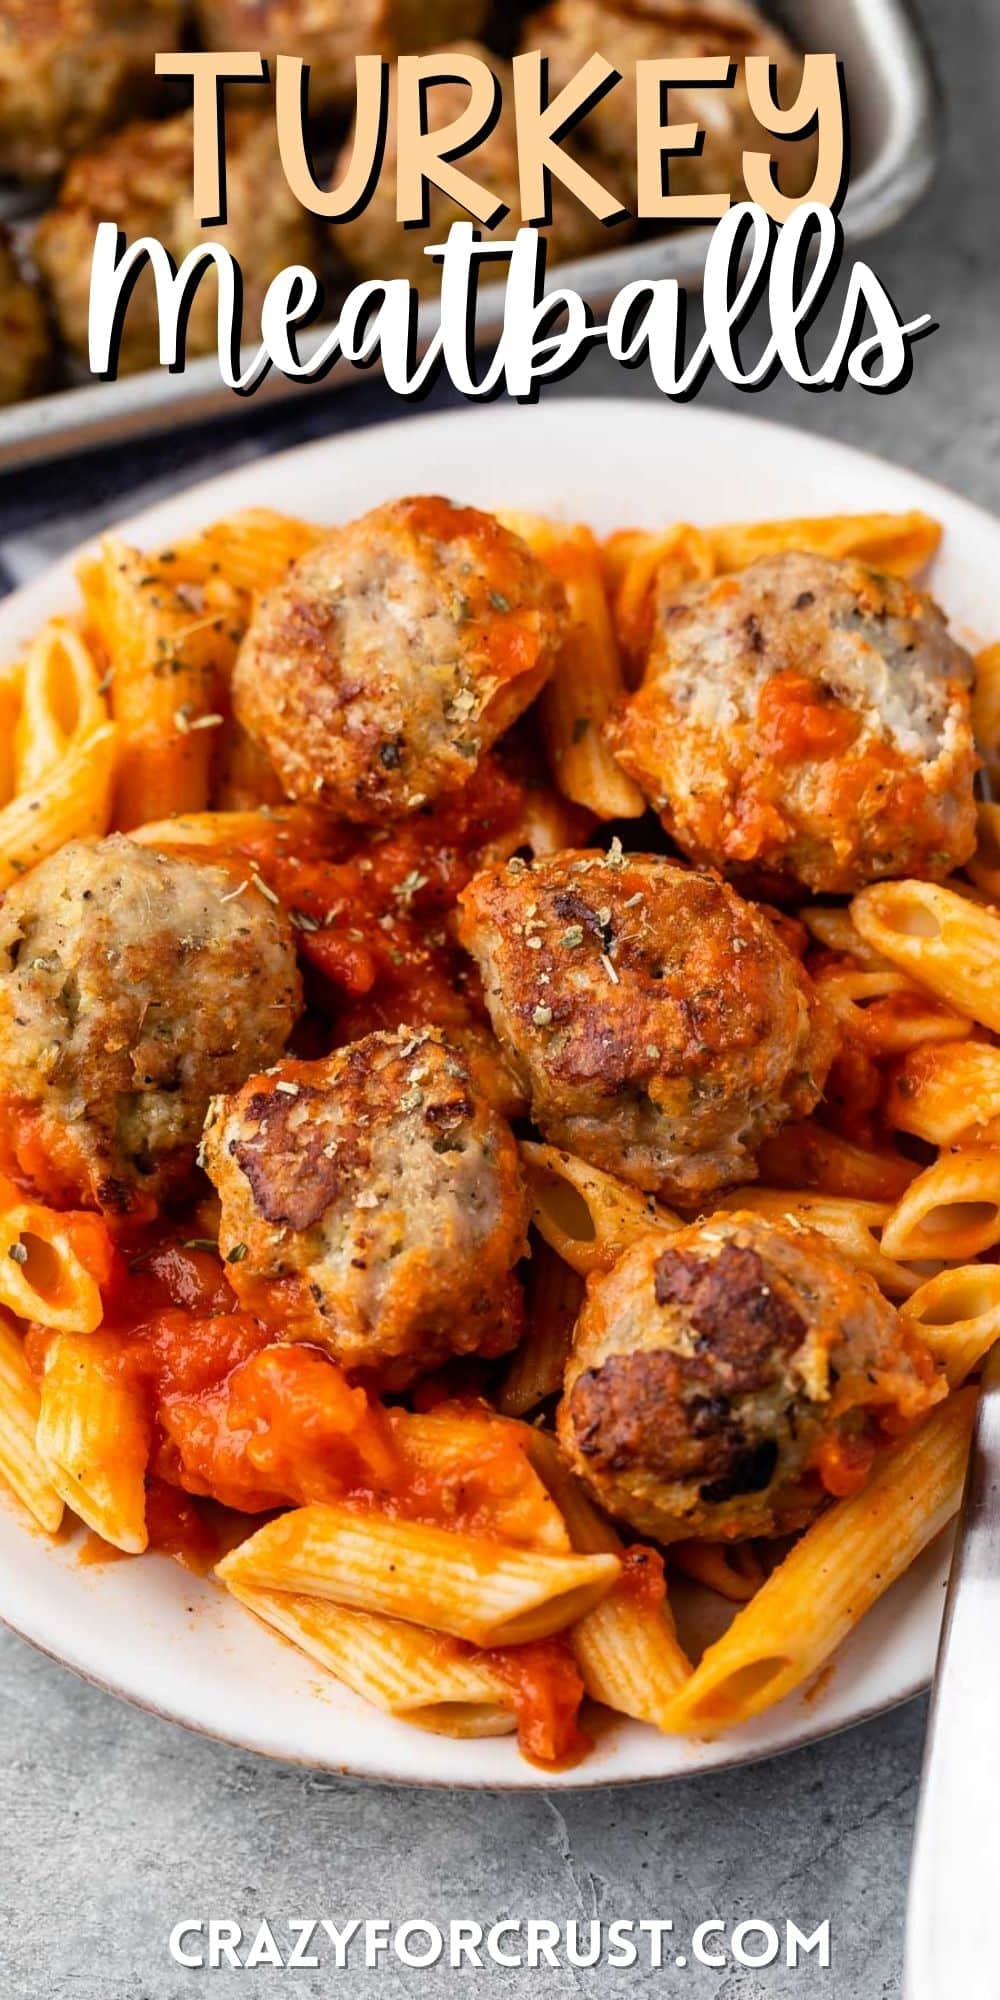 meatballs and pasta mixed together on a white plate with words on the image.